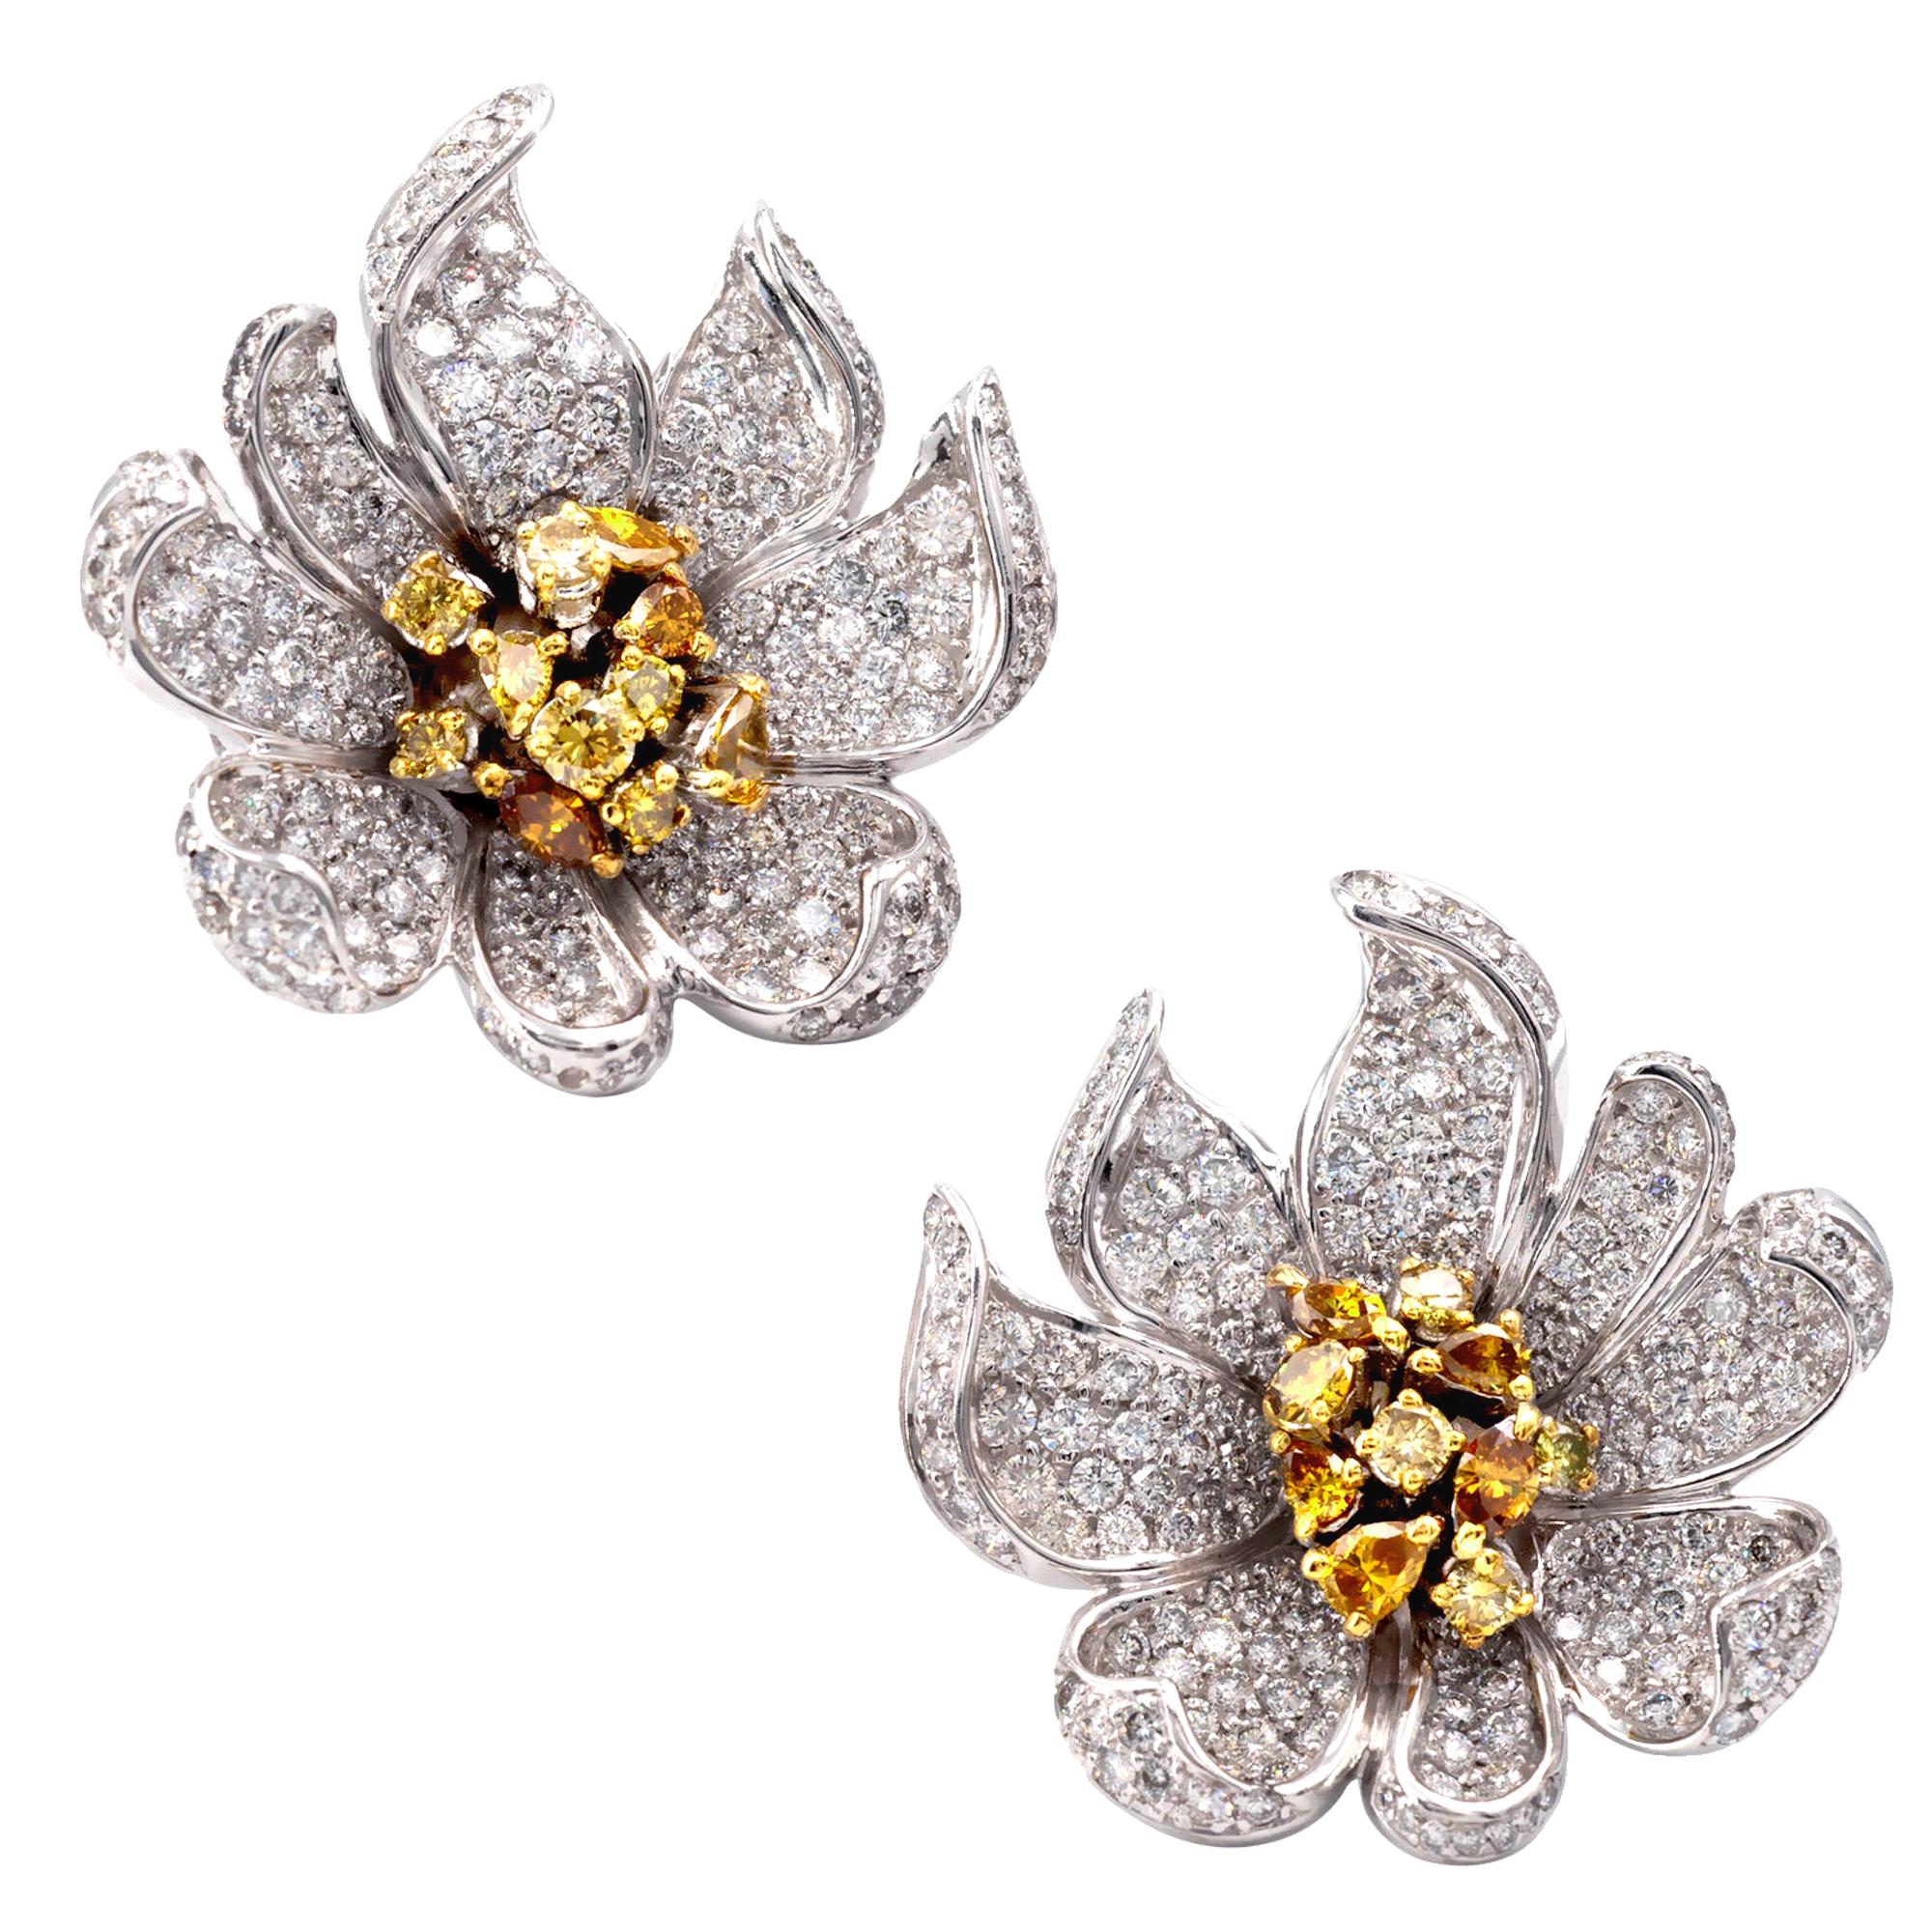 White and Yellow Diamonds 18KT Gold Flower Clip-On Earrings